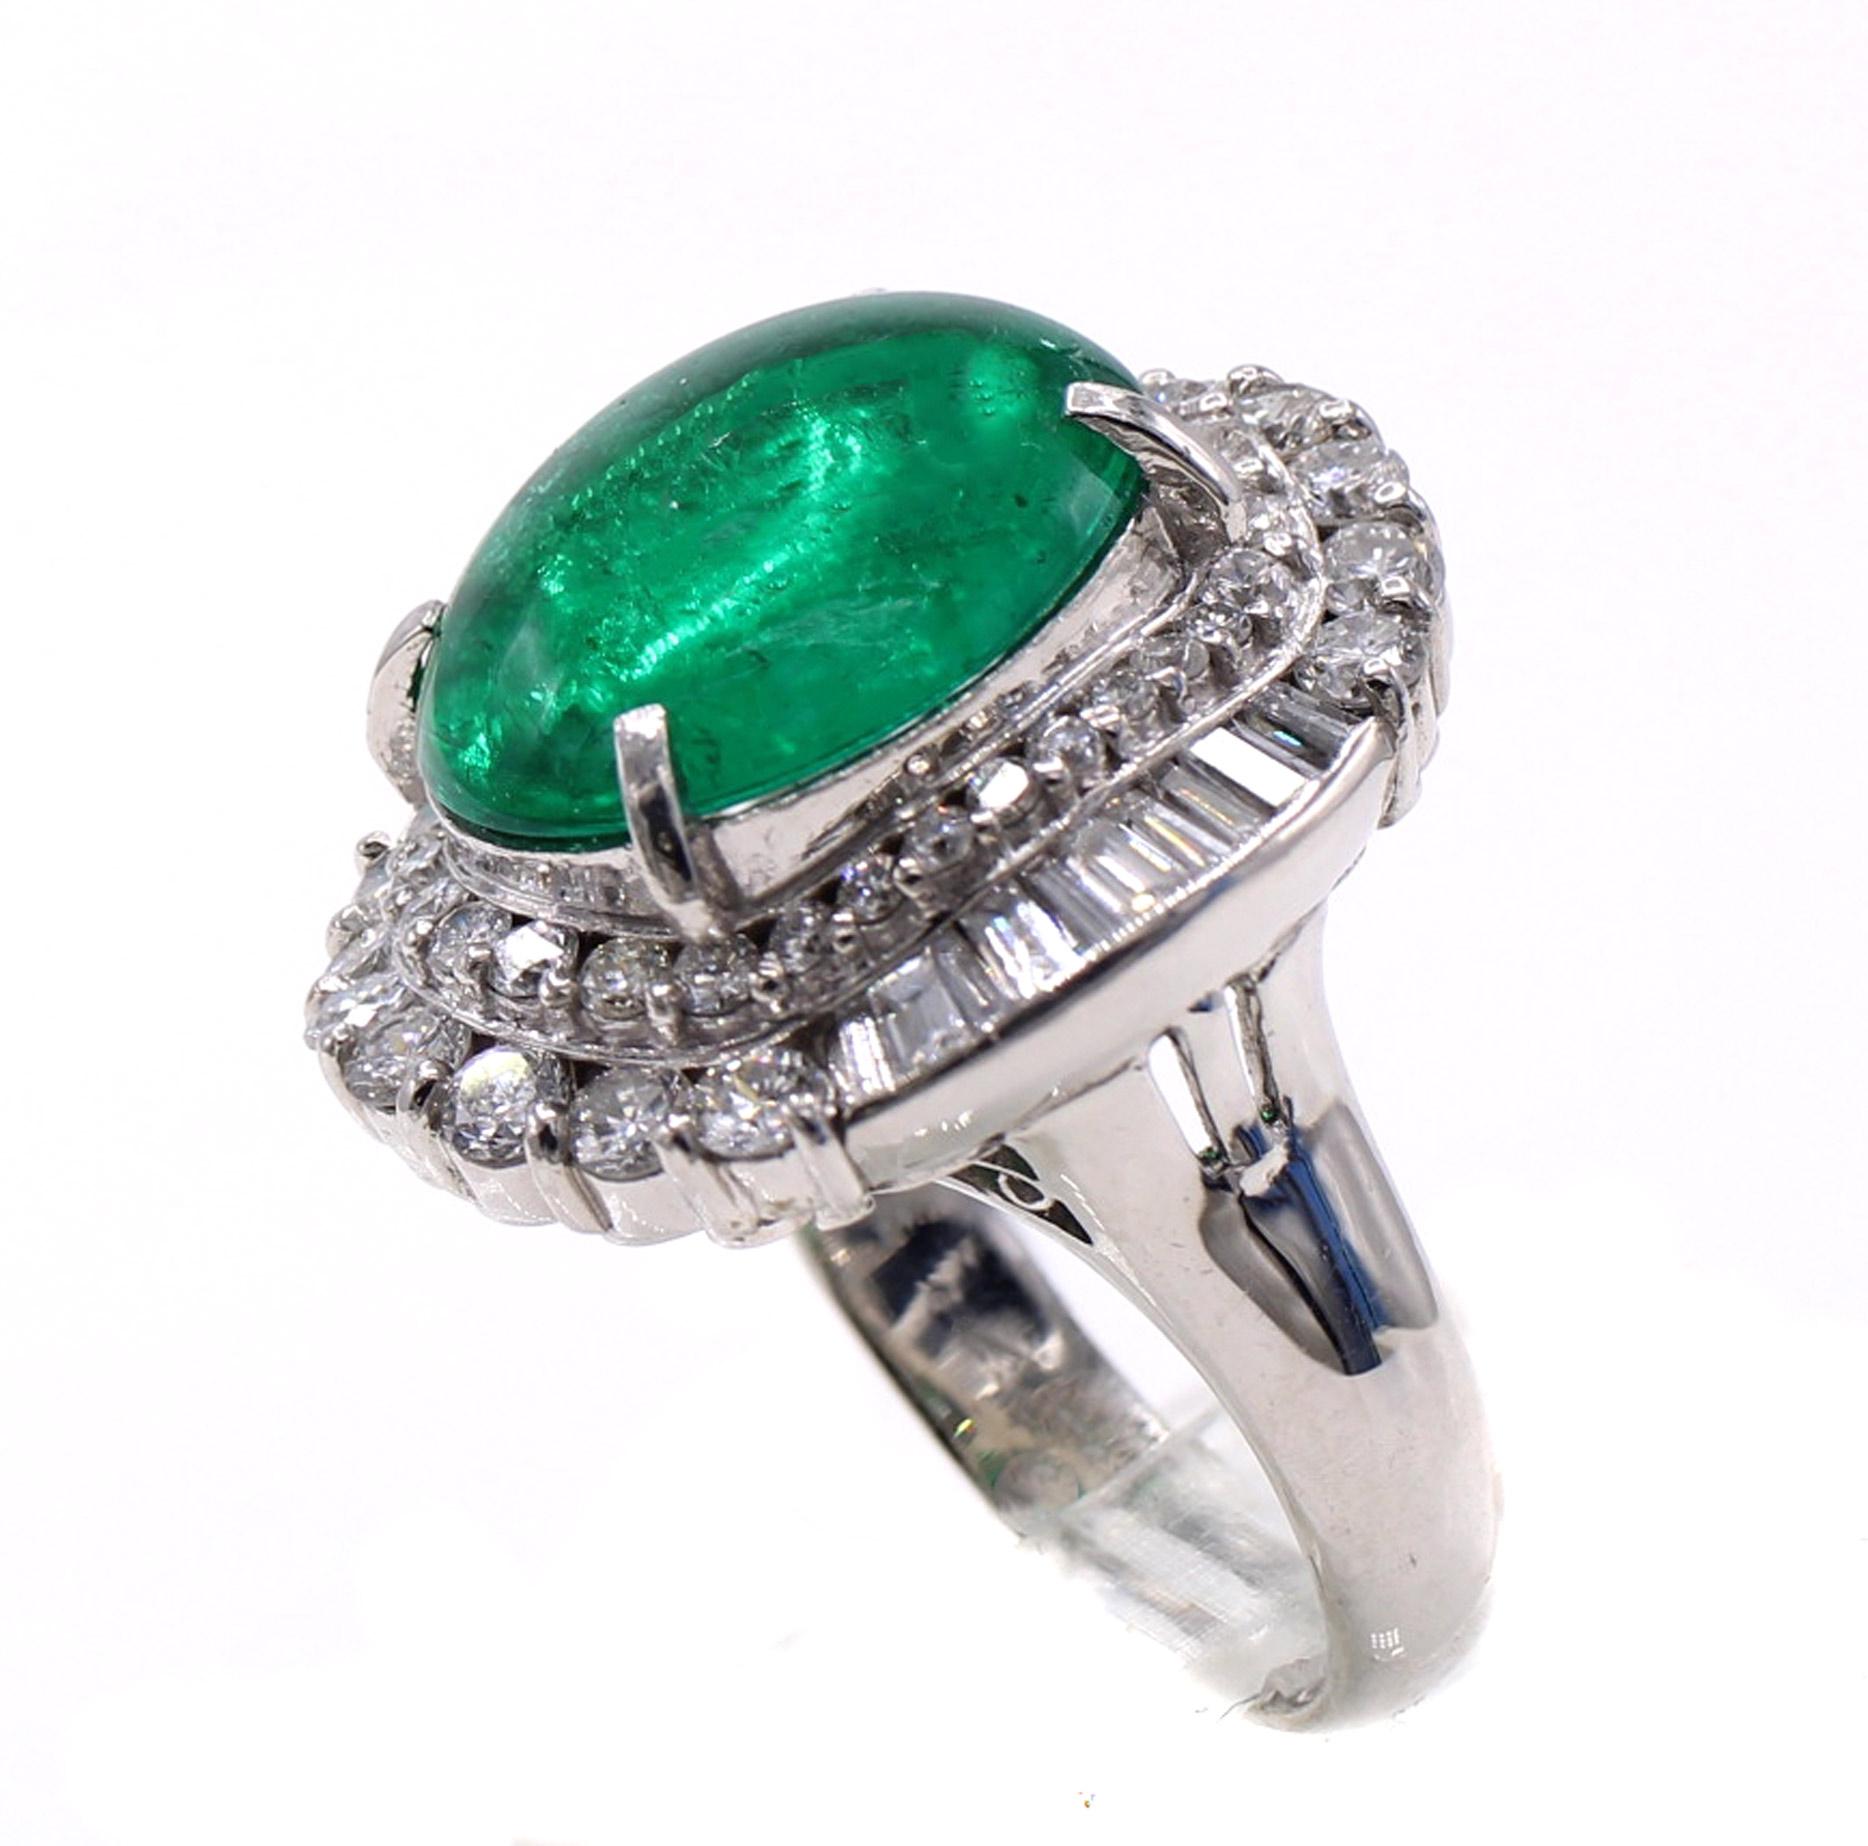 Beautifully designed and masterfully handcrafted platinum emerald diamond cocktail ring featuring a Colombian cabochon emerald weighing 5.01 carats. The perfectly cut cabochon displays a strongly saturated forest green and is embellished by bright